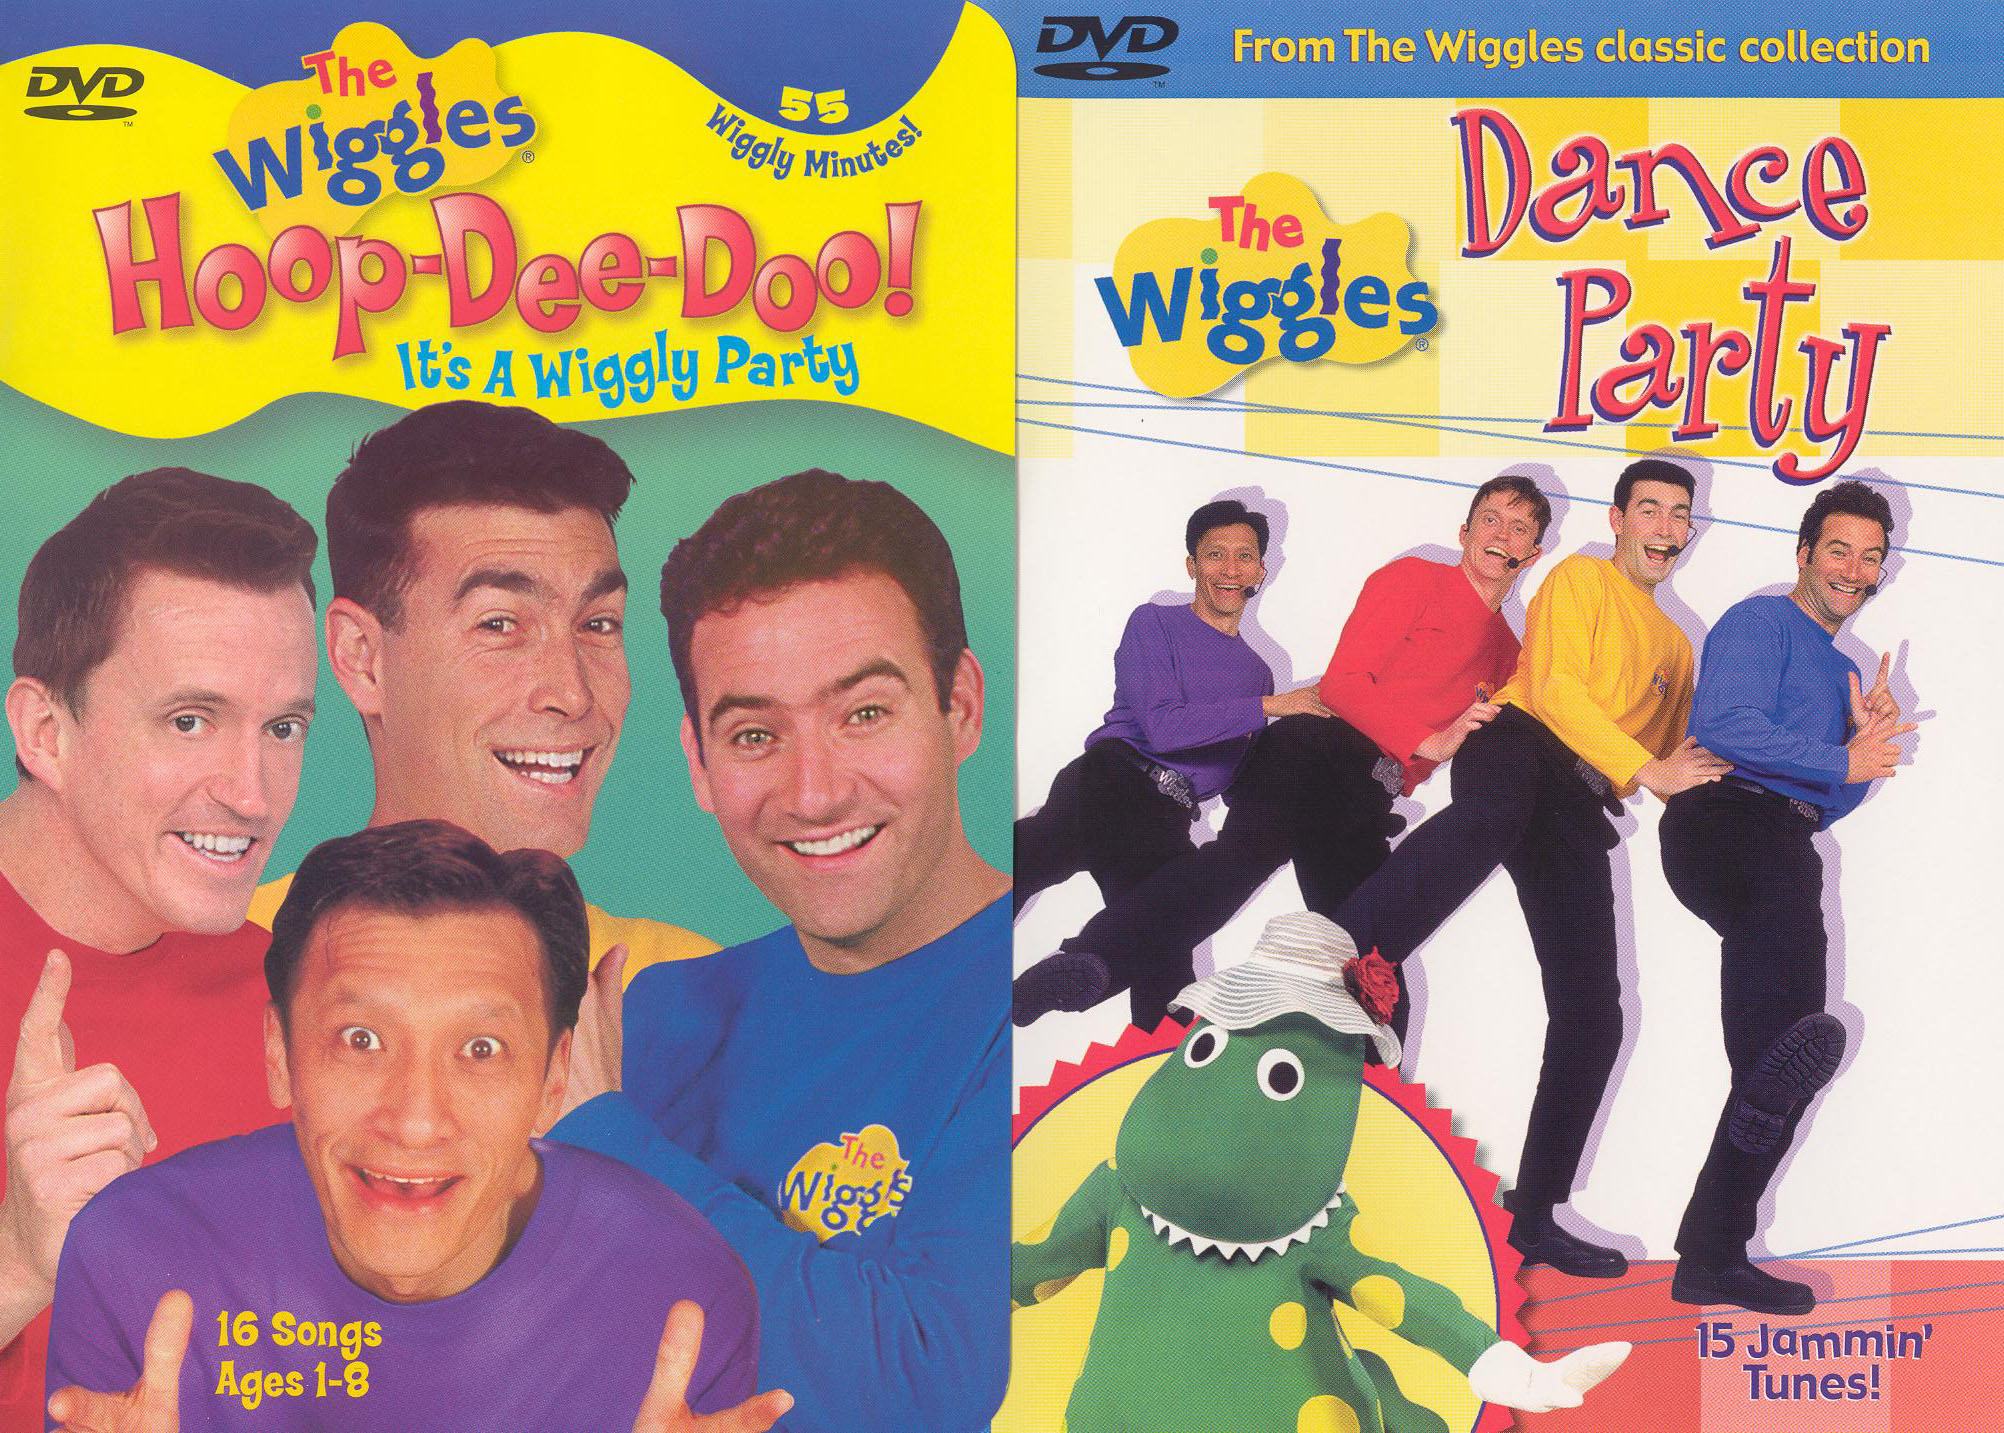 It's a Wiggly Party/Dance Party 2 Discs DVD.